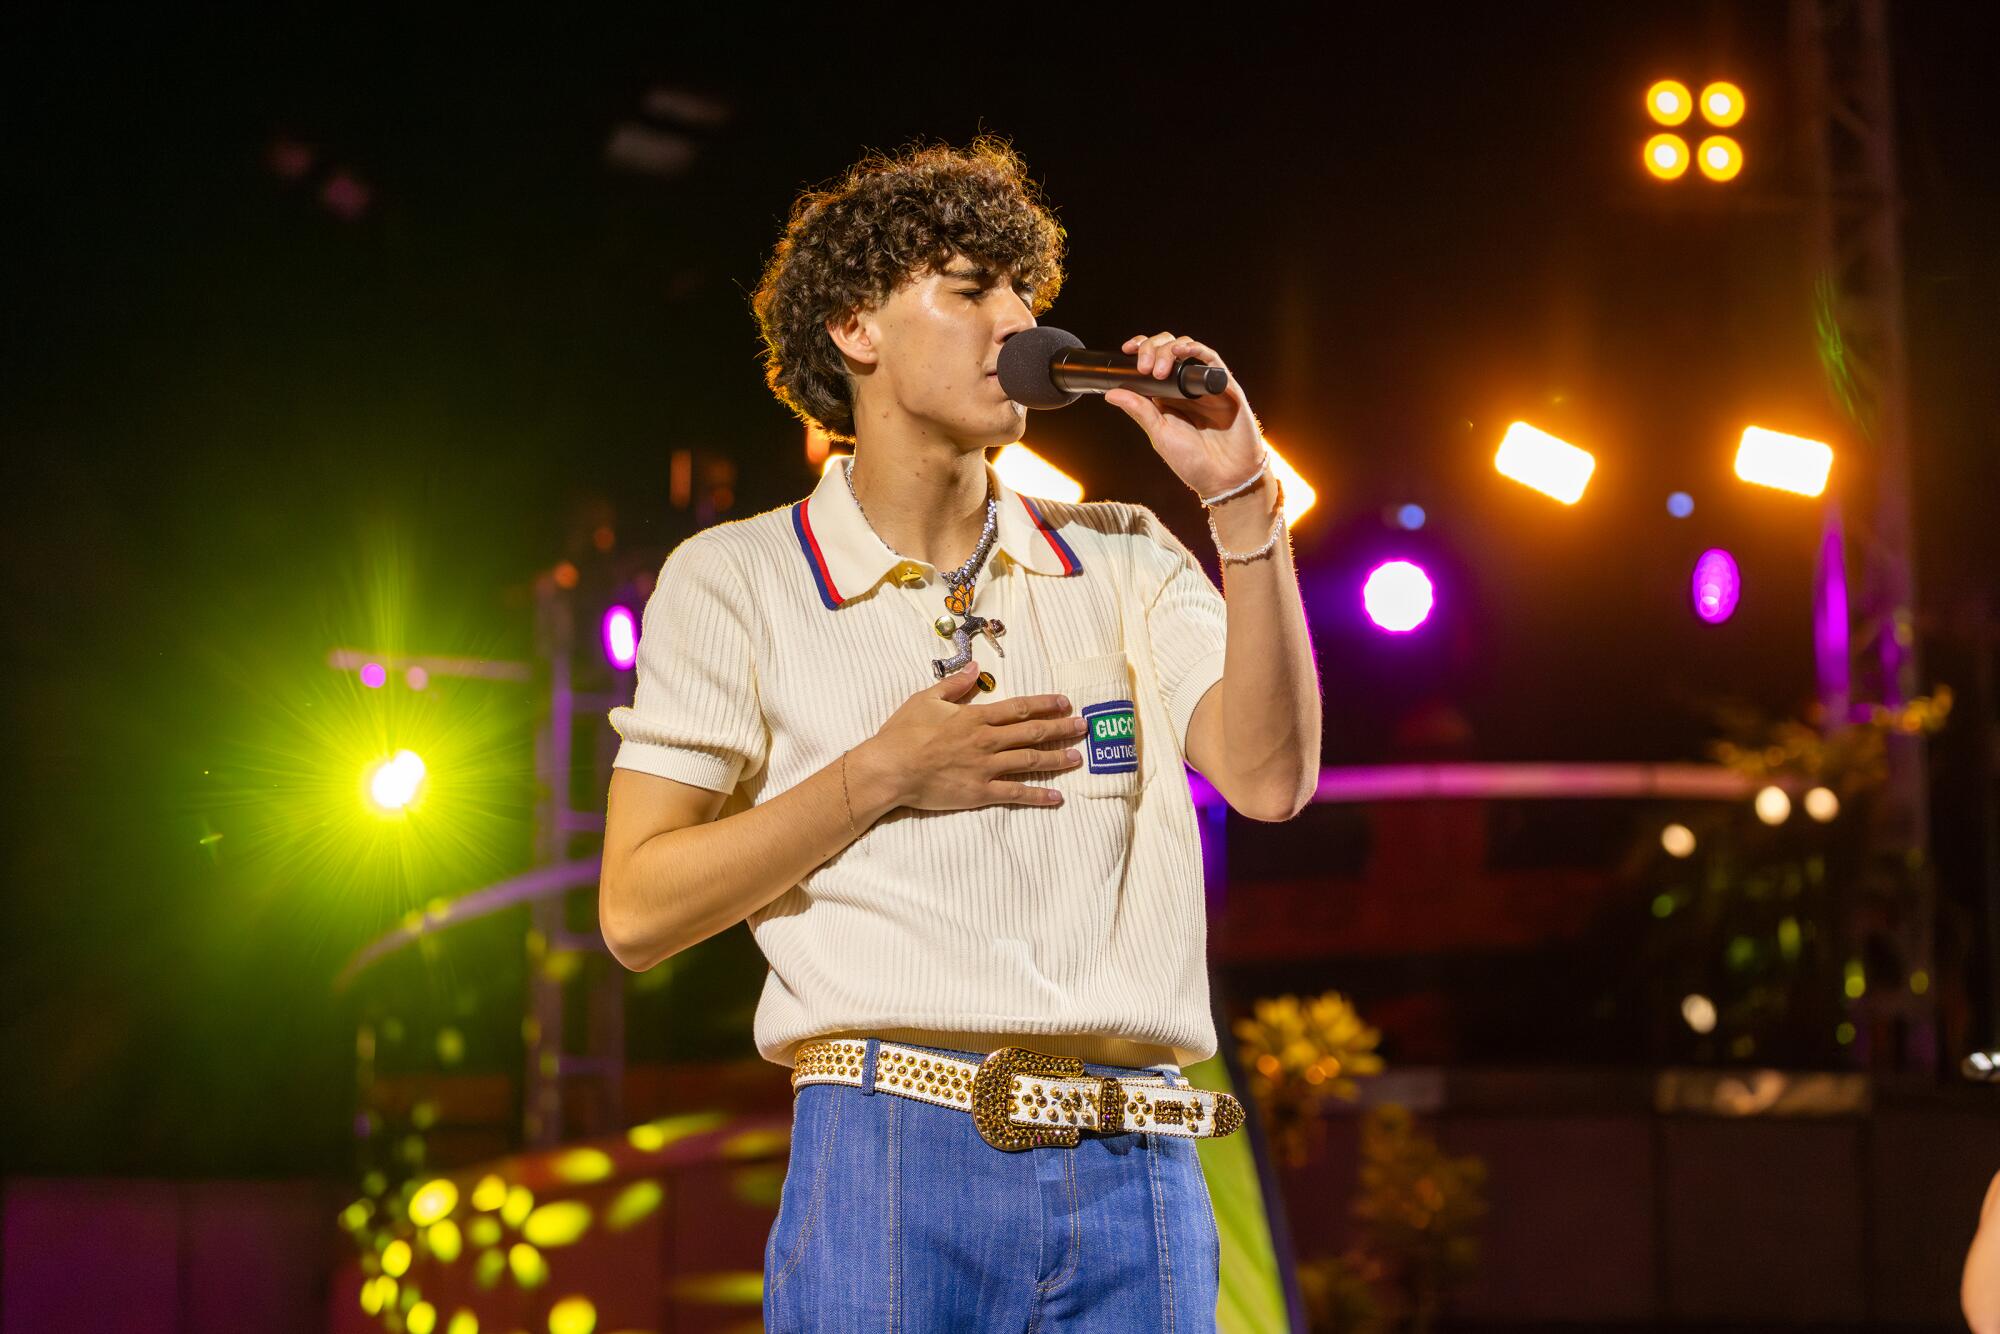 DannyLux performs onstage in a polo shirt and jeans.